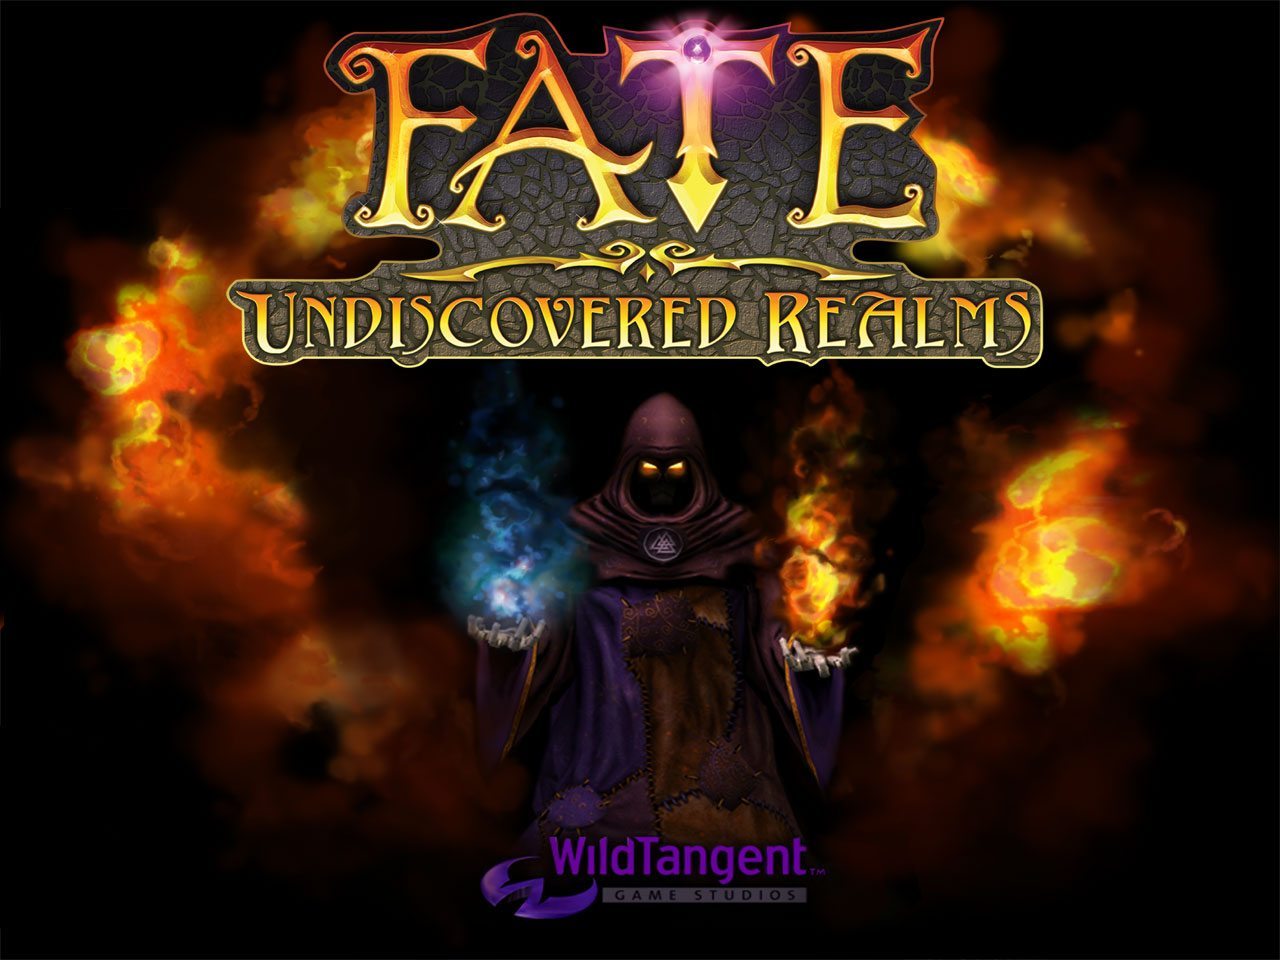 fate undiscovered realms full version free download